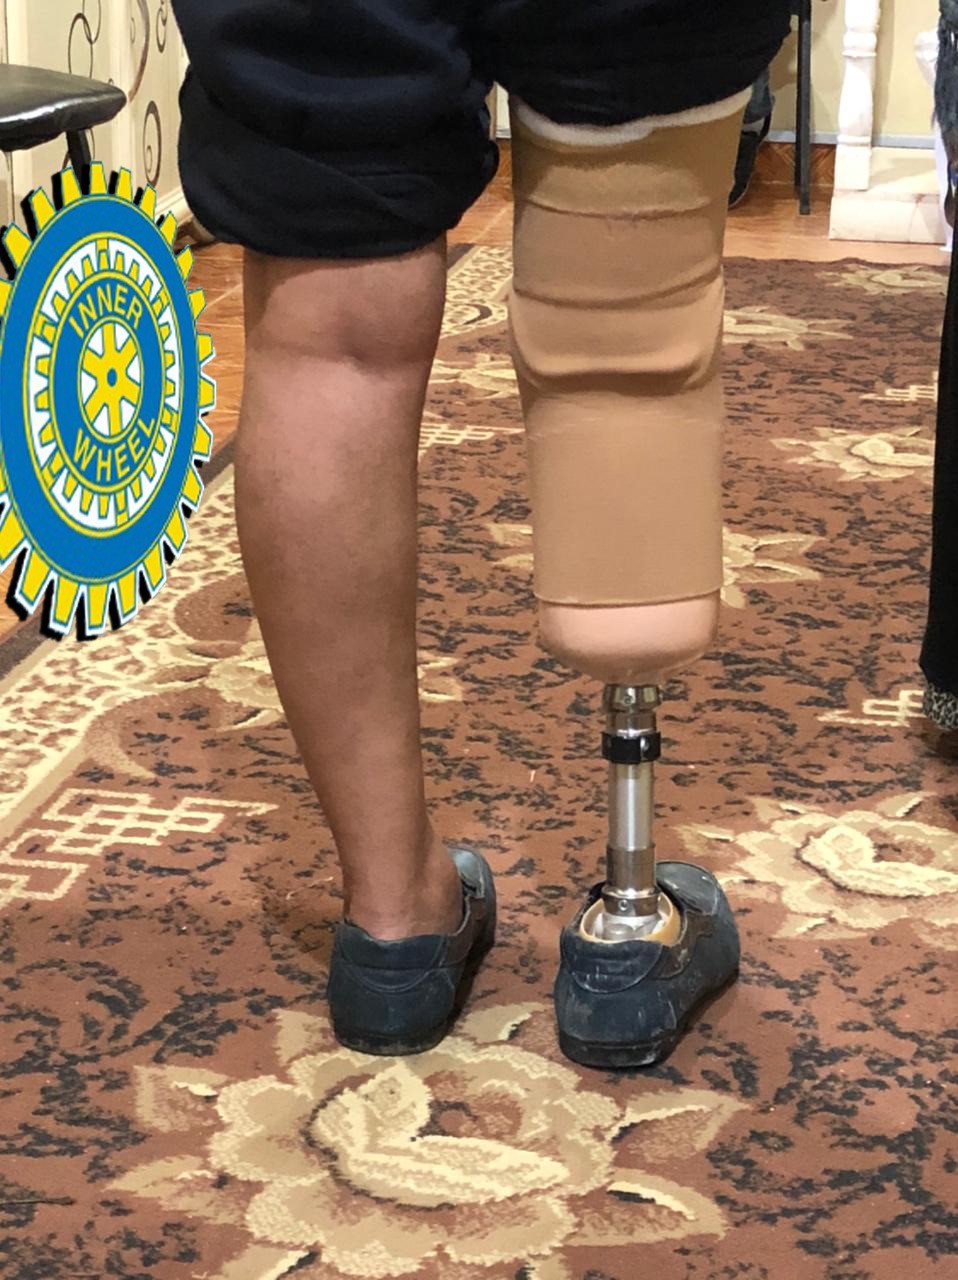 A prosthetic limb to an amputated leg